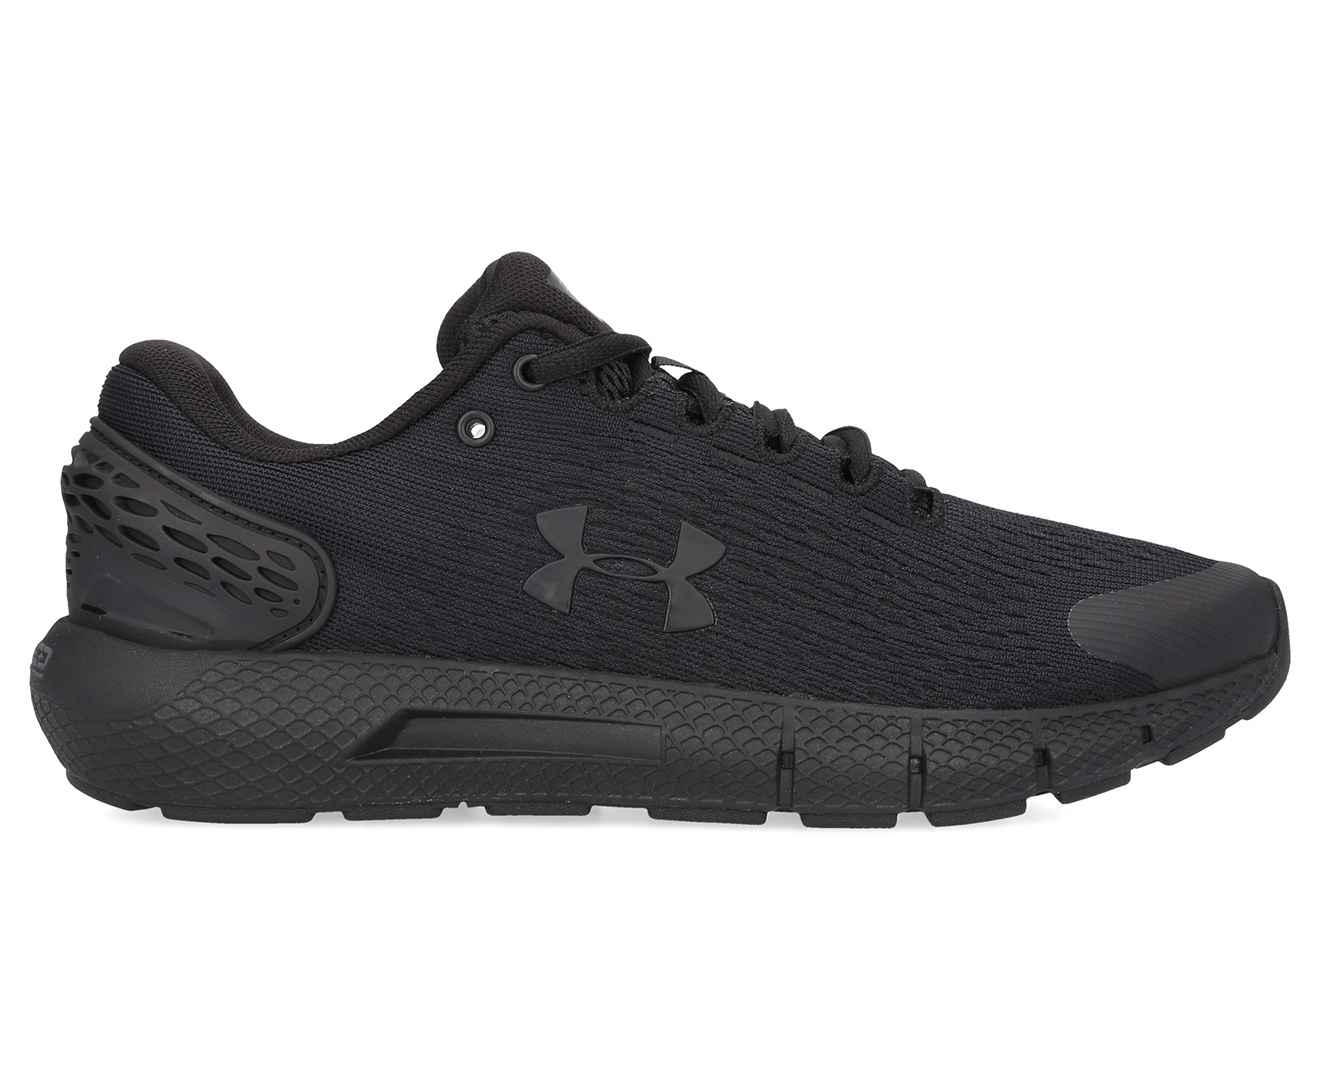 Under Armour Women's UA Charged Rogue 2 Running Shoes - Black | Catch.co.nz